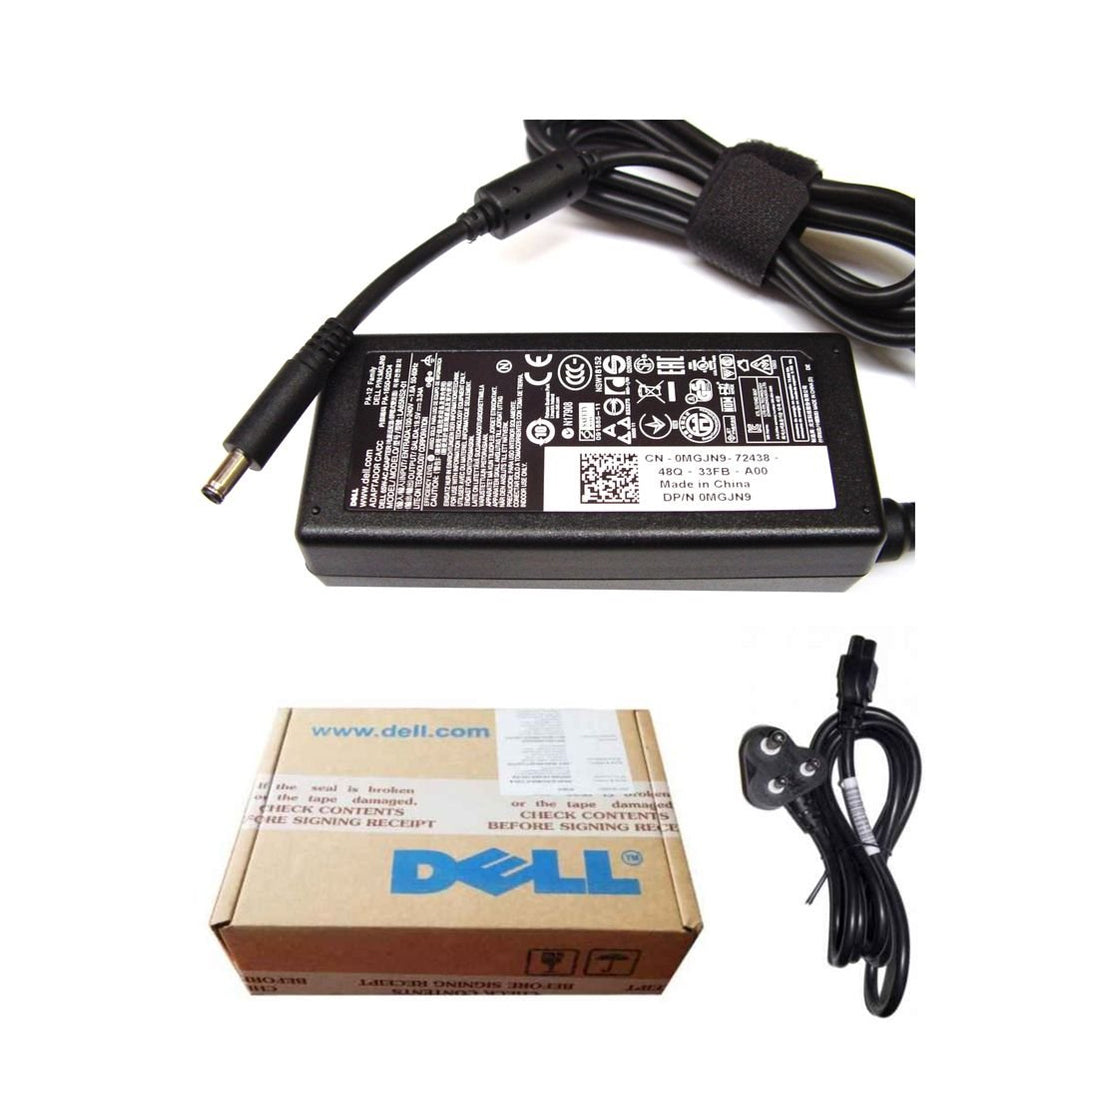 Dell Original 65W 19.5V 4.5mm Pin Laptop Charger Adapter for Inspiron 15 3559 With Power Cord